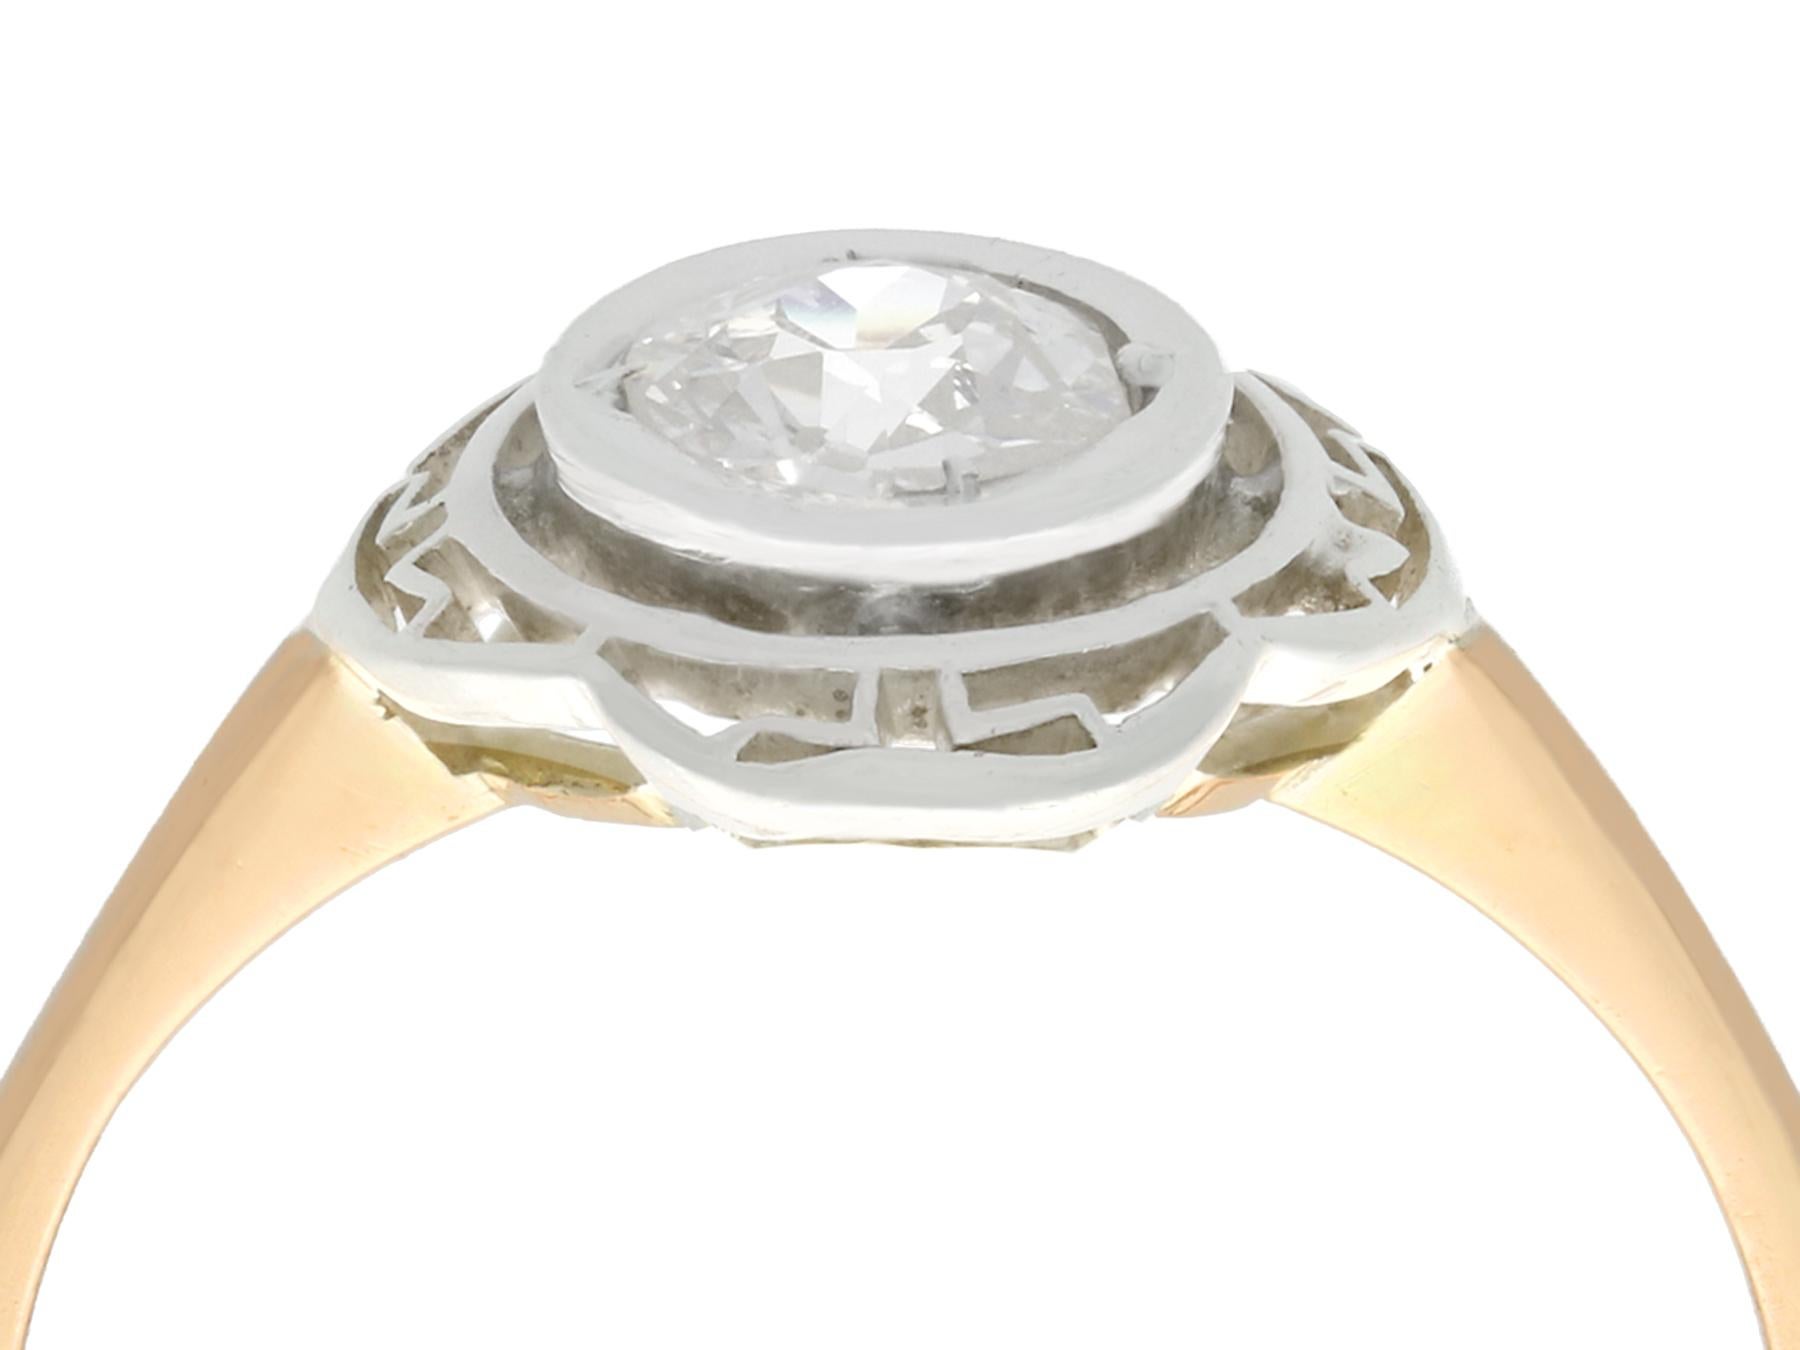 A fine and impressive 0.51 carat diamond, 14 karat yellow gold and silver set solitaire ring; part of our collection of antique diamond rings.

This fine and impressive bezel set diamond ring has been crafted in 14k yellow gold with a silver